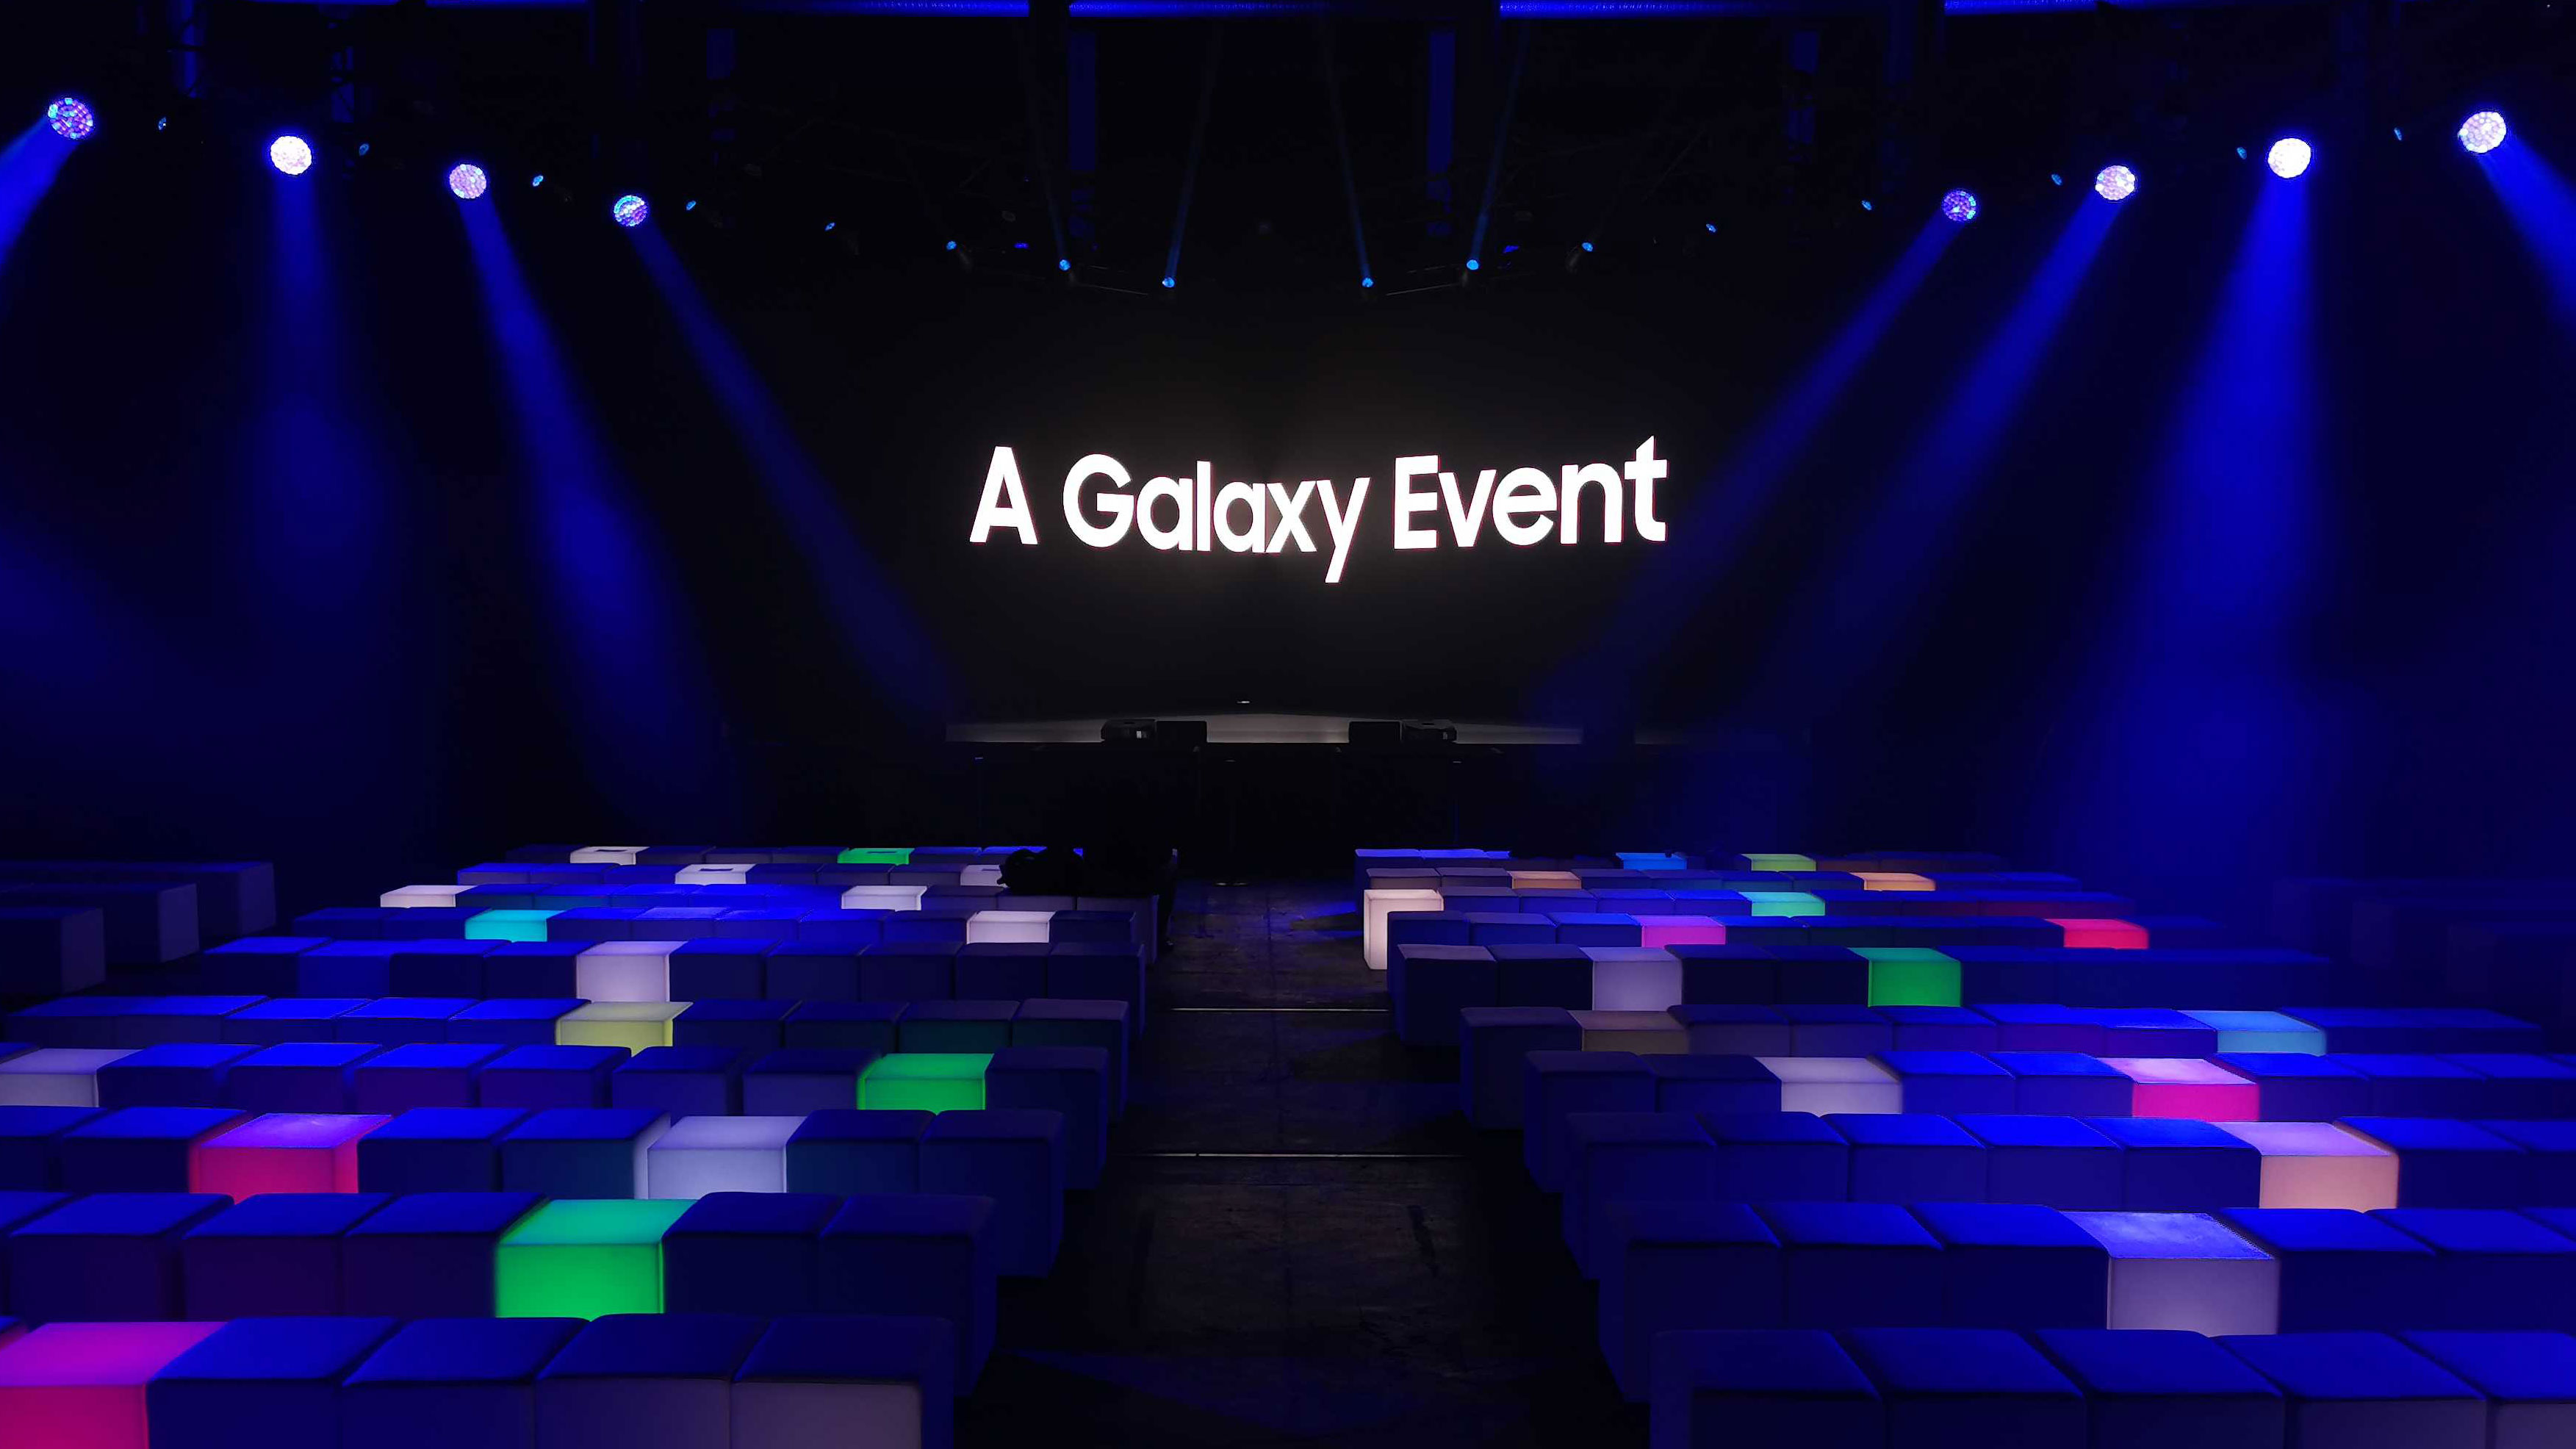 samsung product launch event